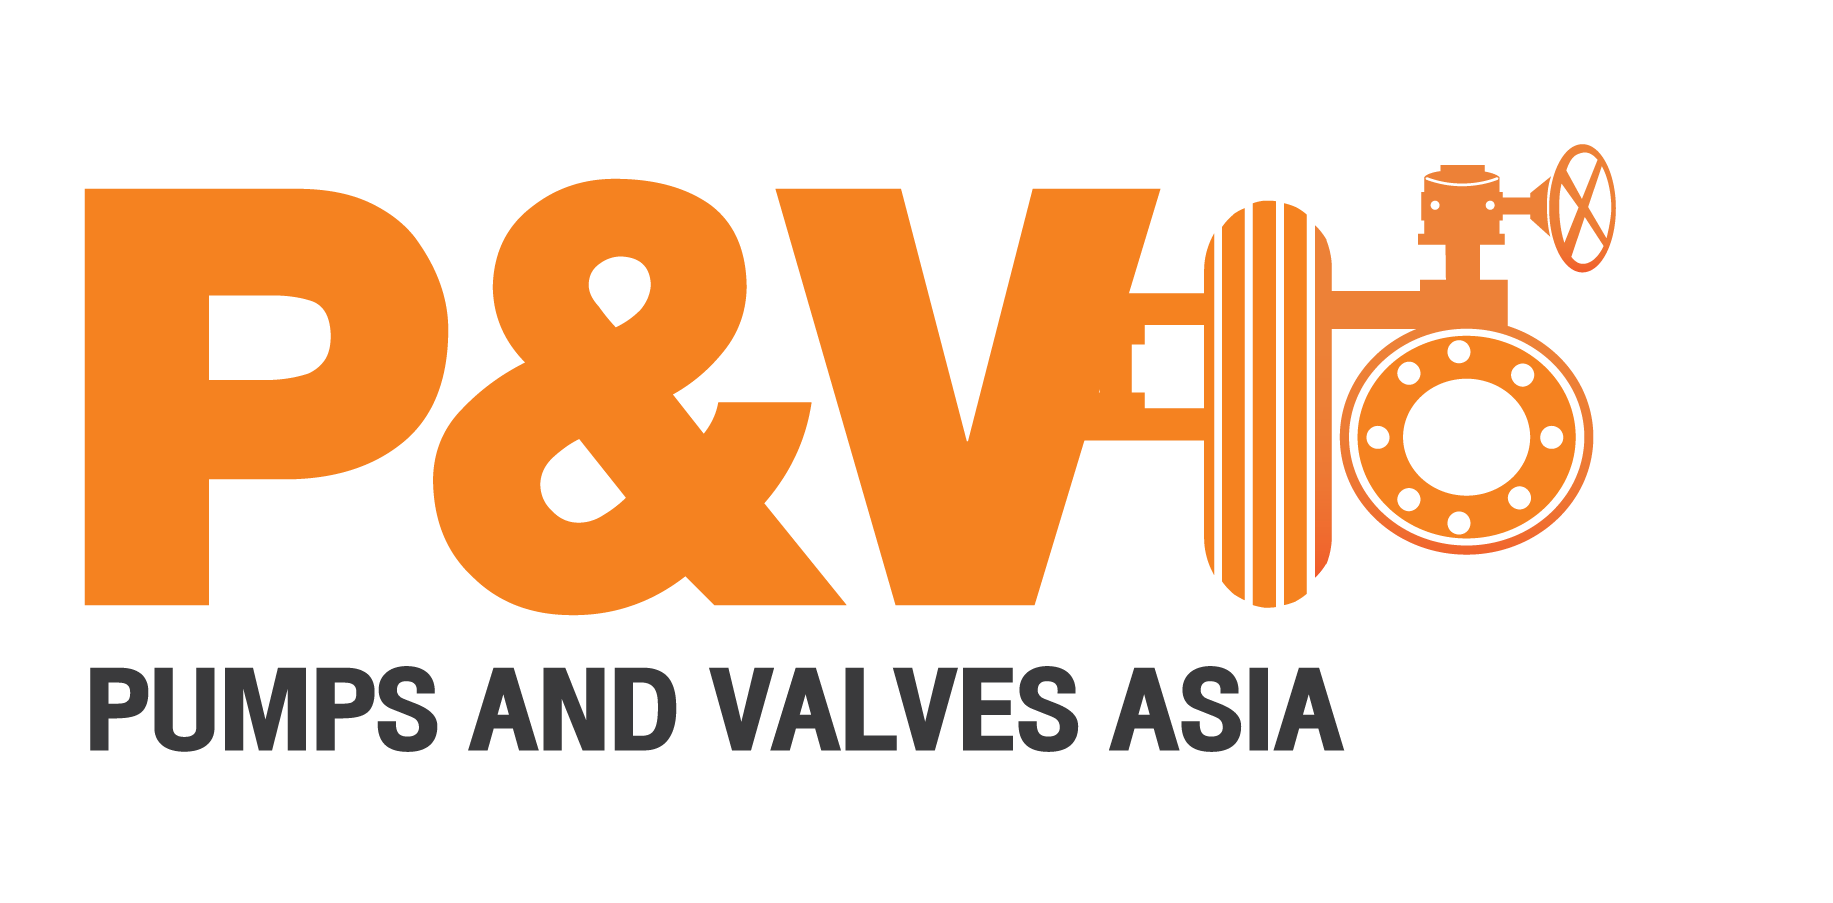 PUMPS AND VALVES ASIA